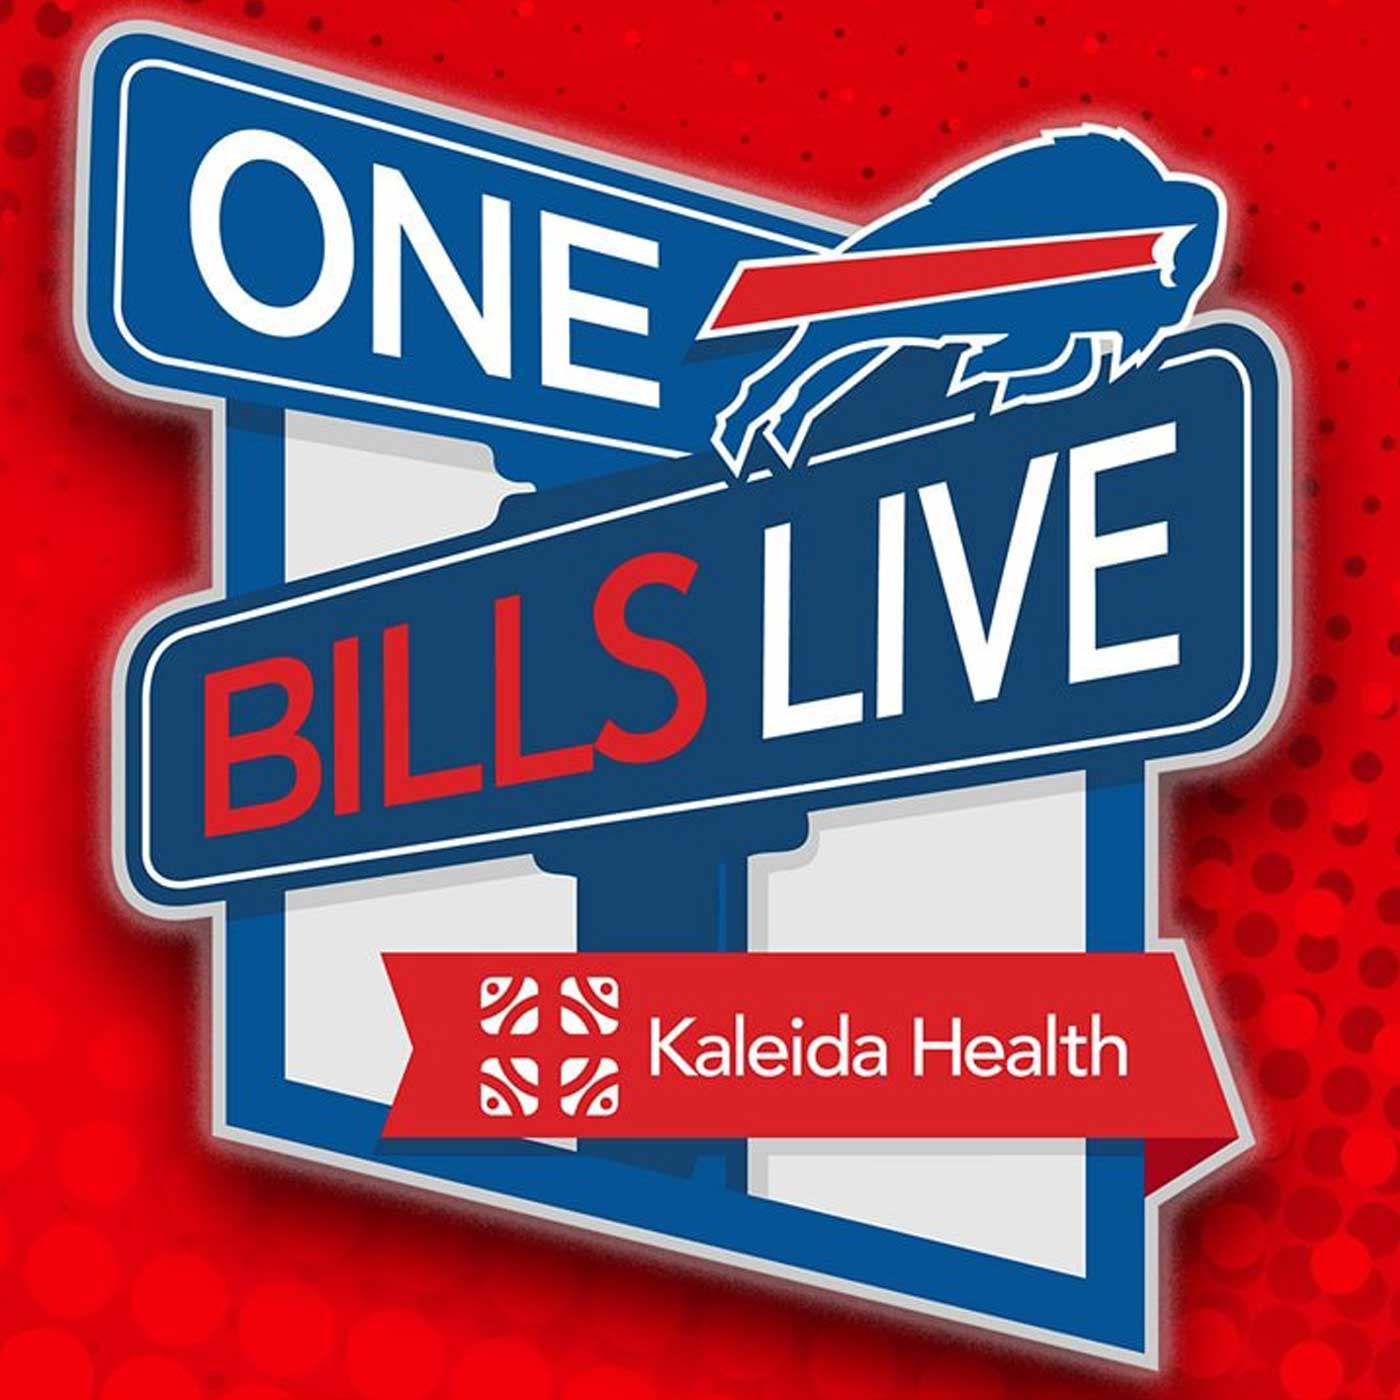 OBL 6/6: Thurman Thomas discusses his foundation raising money to support the community, Bills defense could rank #1 if ___